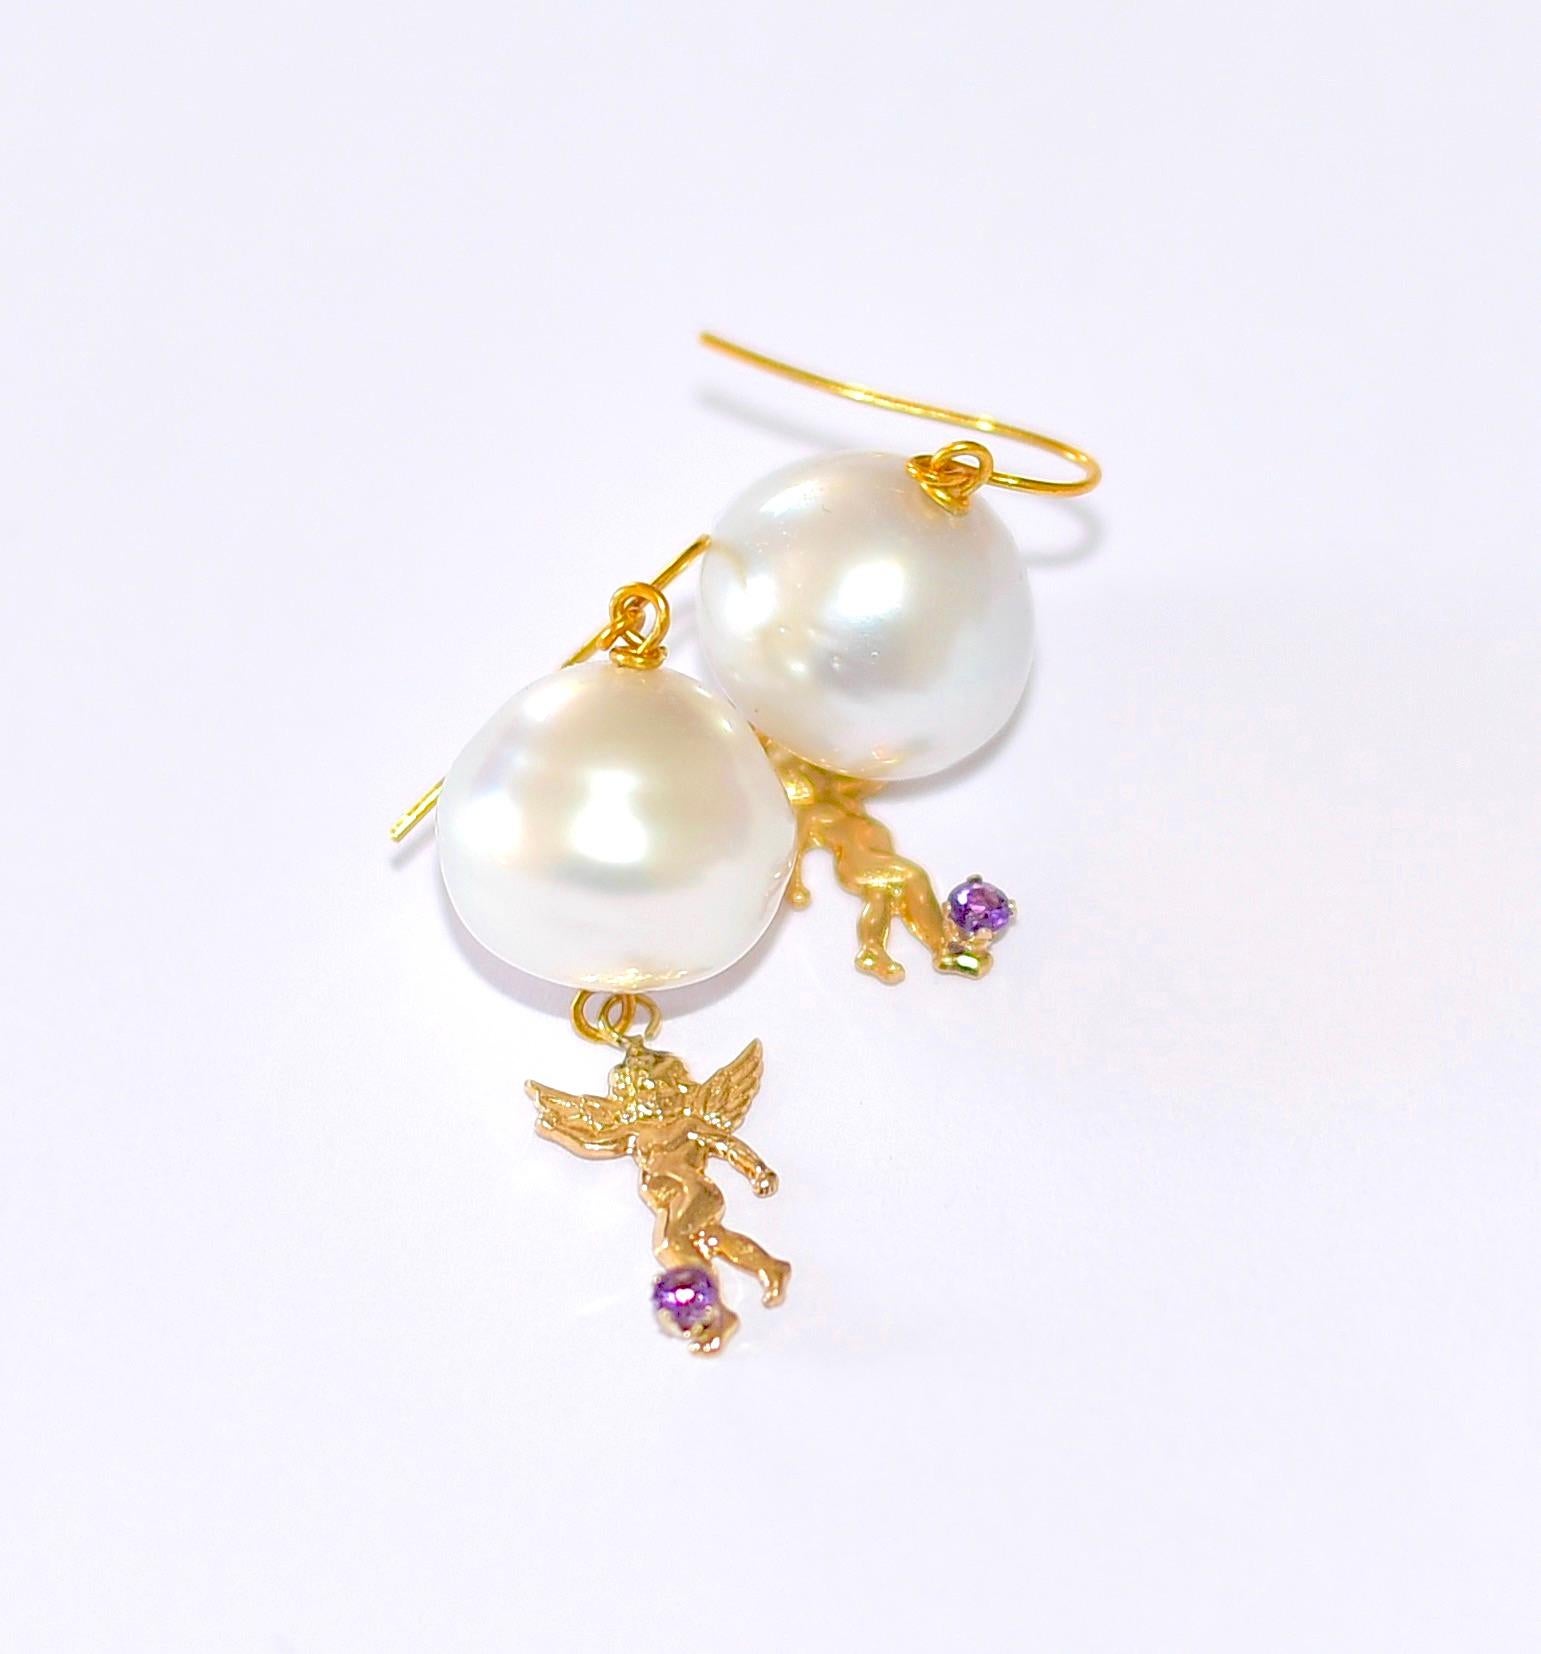 Australian Paspaley Cultured Pearl earrings, 14K Yellow Gold Angel with Amethyst 4